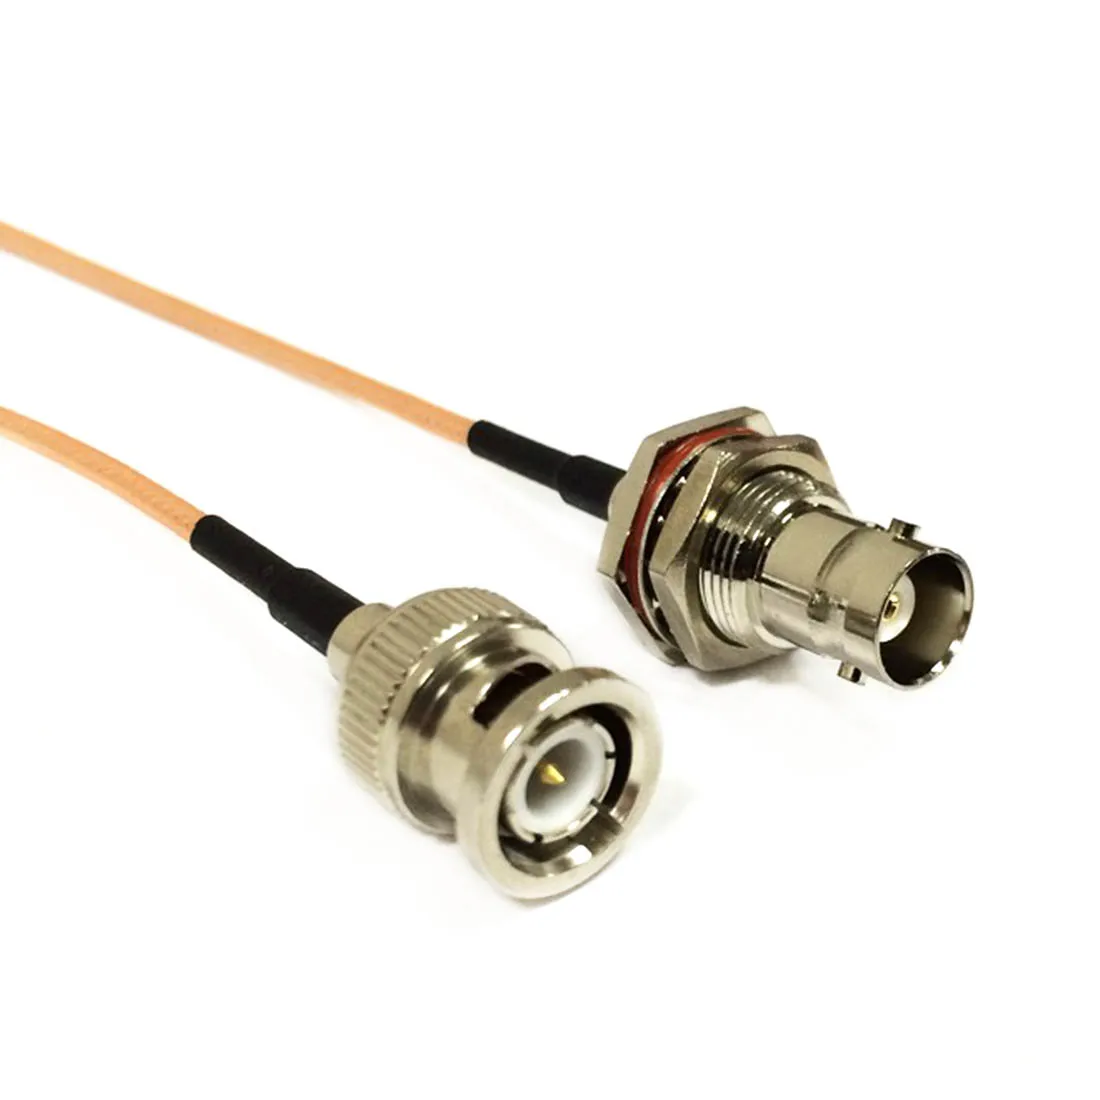 

Moodem Coaxial Cable BNC Male Plug Switch BNC Female Jack Connector RG316 Cable Pigtail 15cm 6" Adapter New